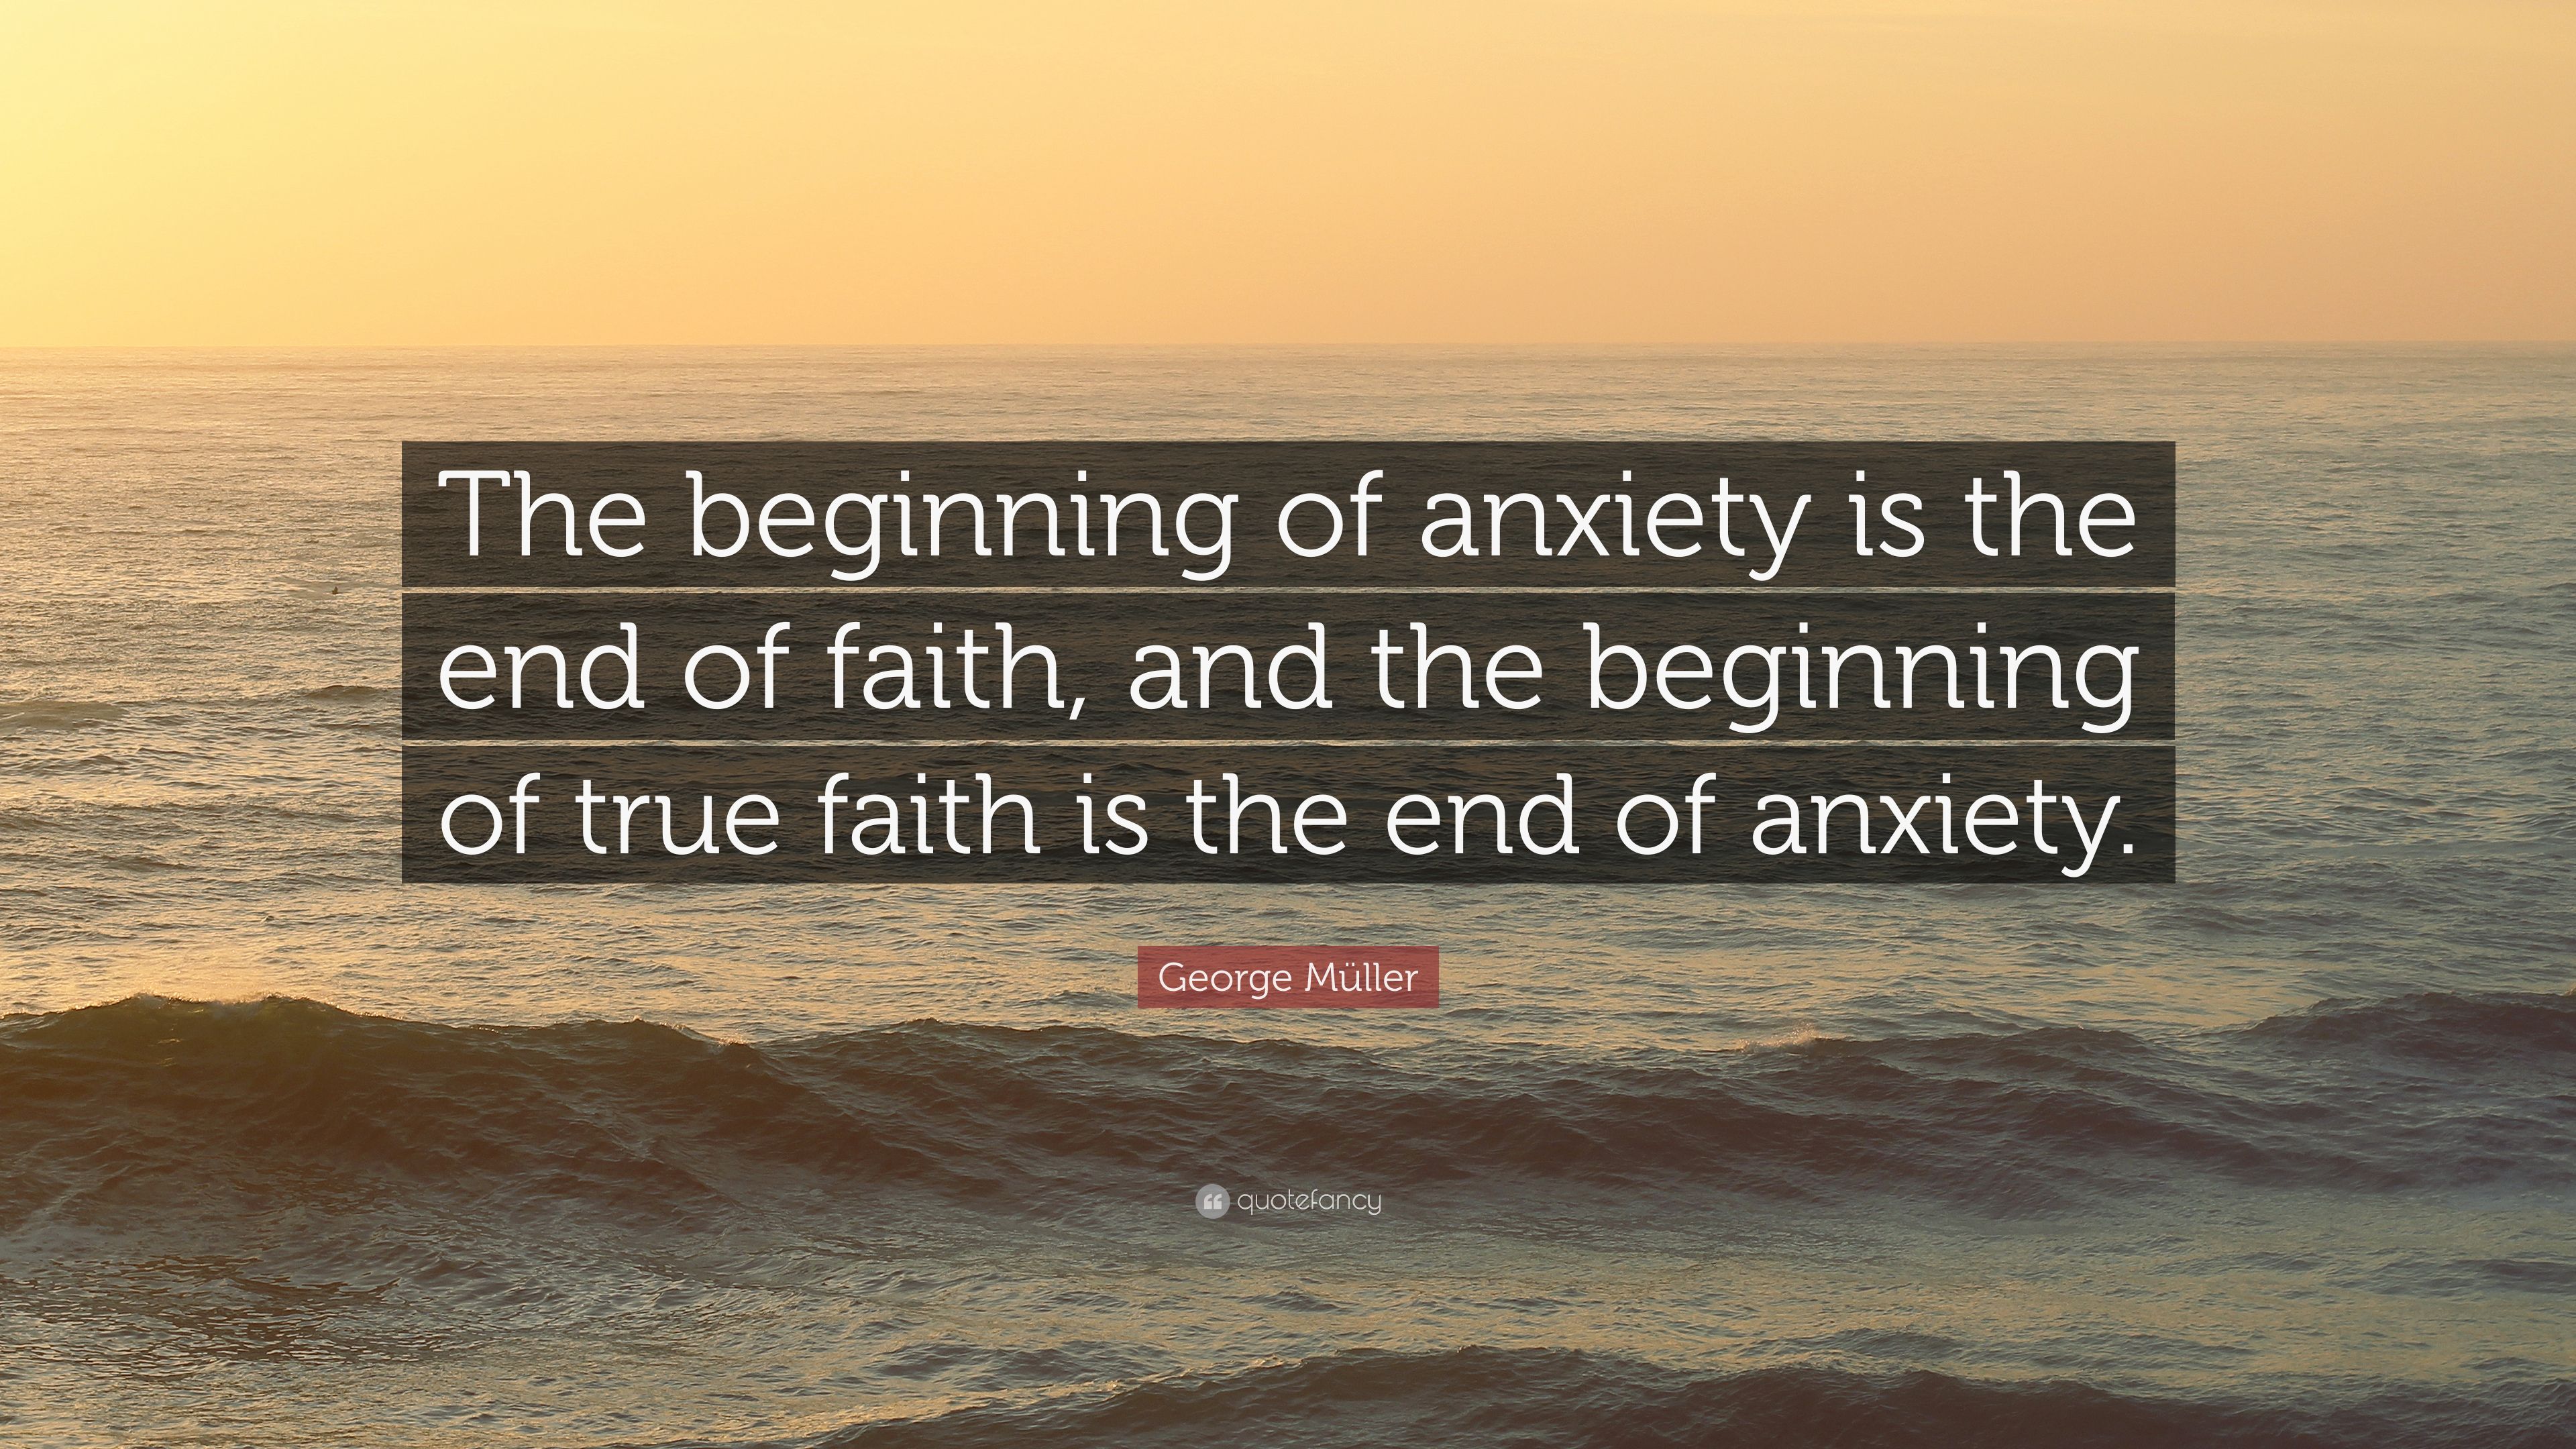 George Müller Quote: “The beginning of anxiety is the end of faith